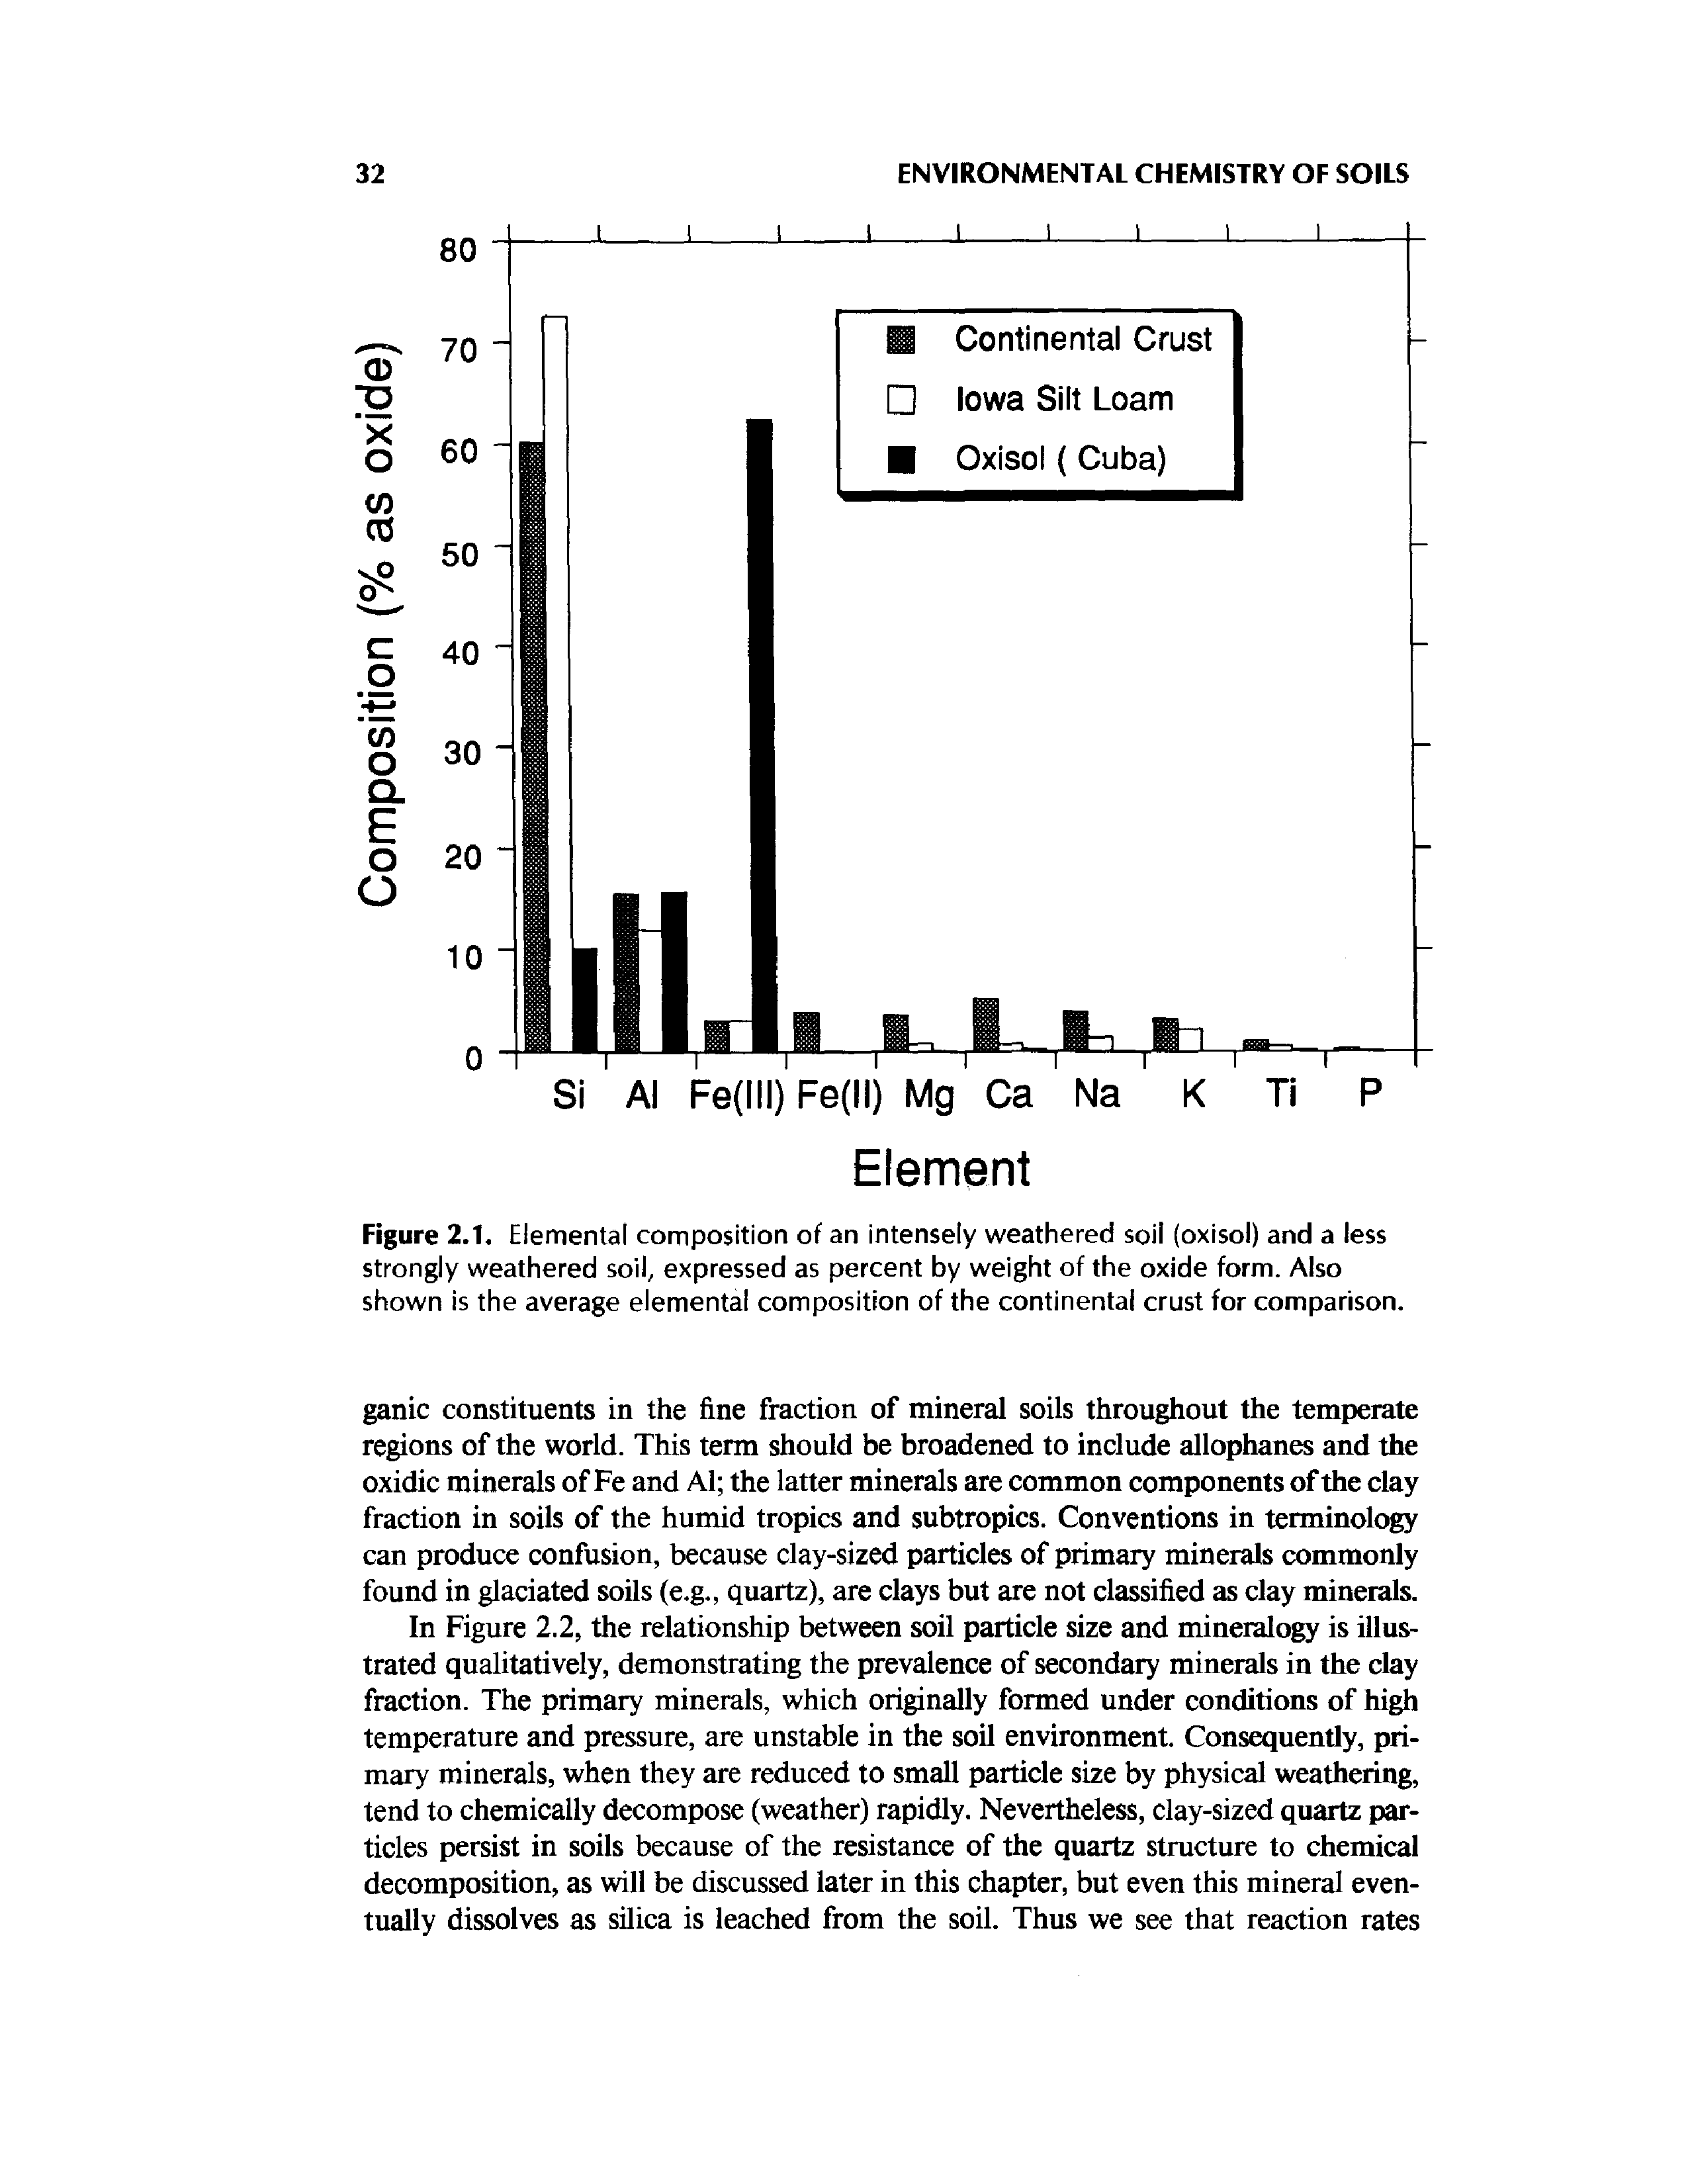 Figure 2.T. Elemental composition of an intensely weathered soil (oxisol) and a less strongly weathered soil, expressed as percent by weight of the oxide form. Also shown is the average elemental composition of the continental crust for comparison.